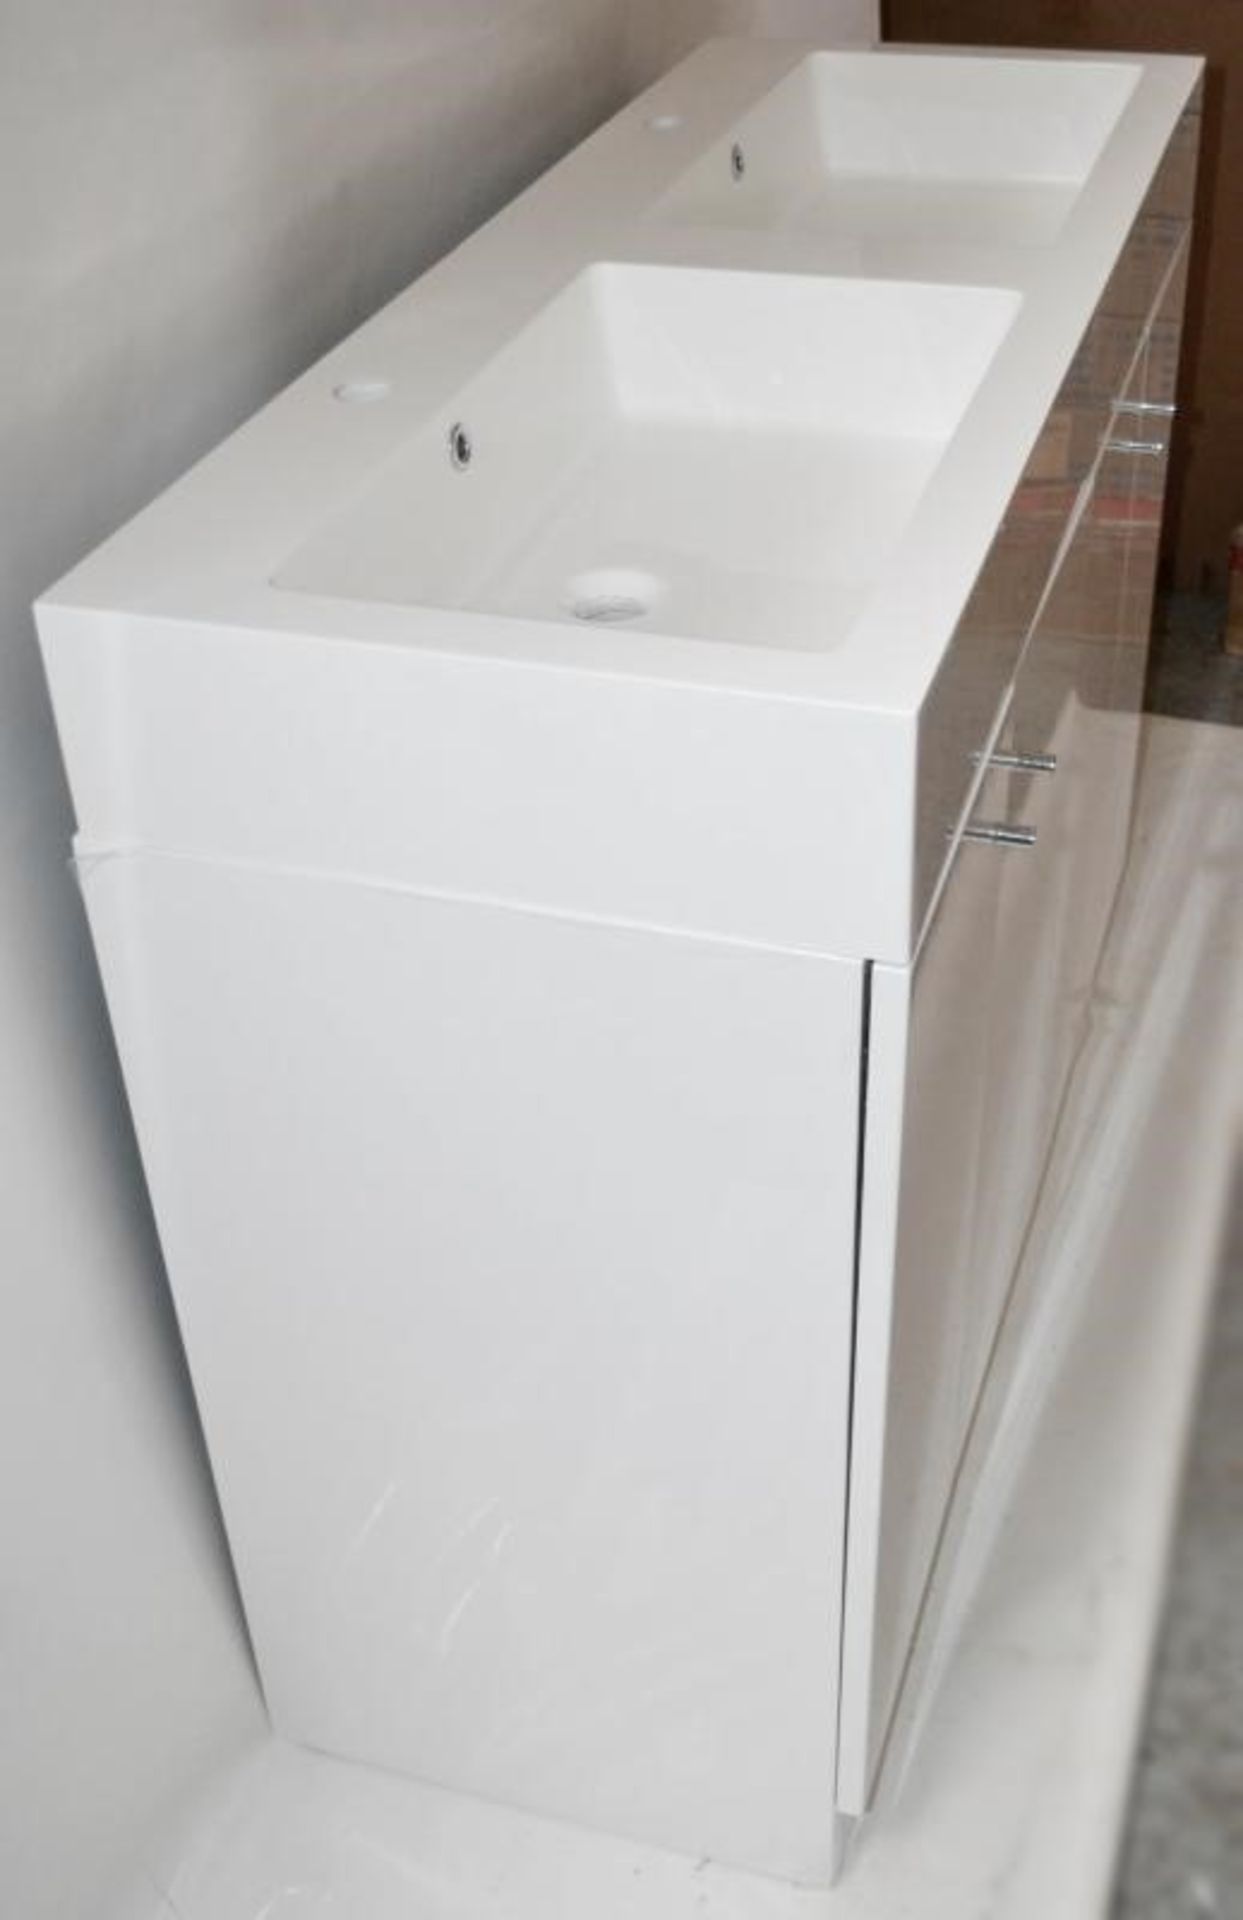 1 x Gloss White 1200mm 4-Door Double Basin Freestanding Bathroom Cabinet - New & Boxed Stock - CL307 - Image 6 of 6